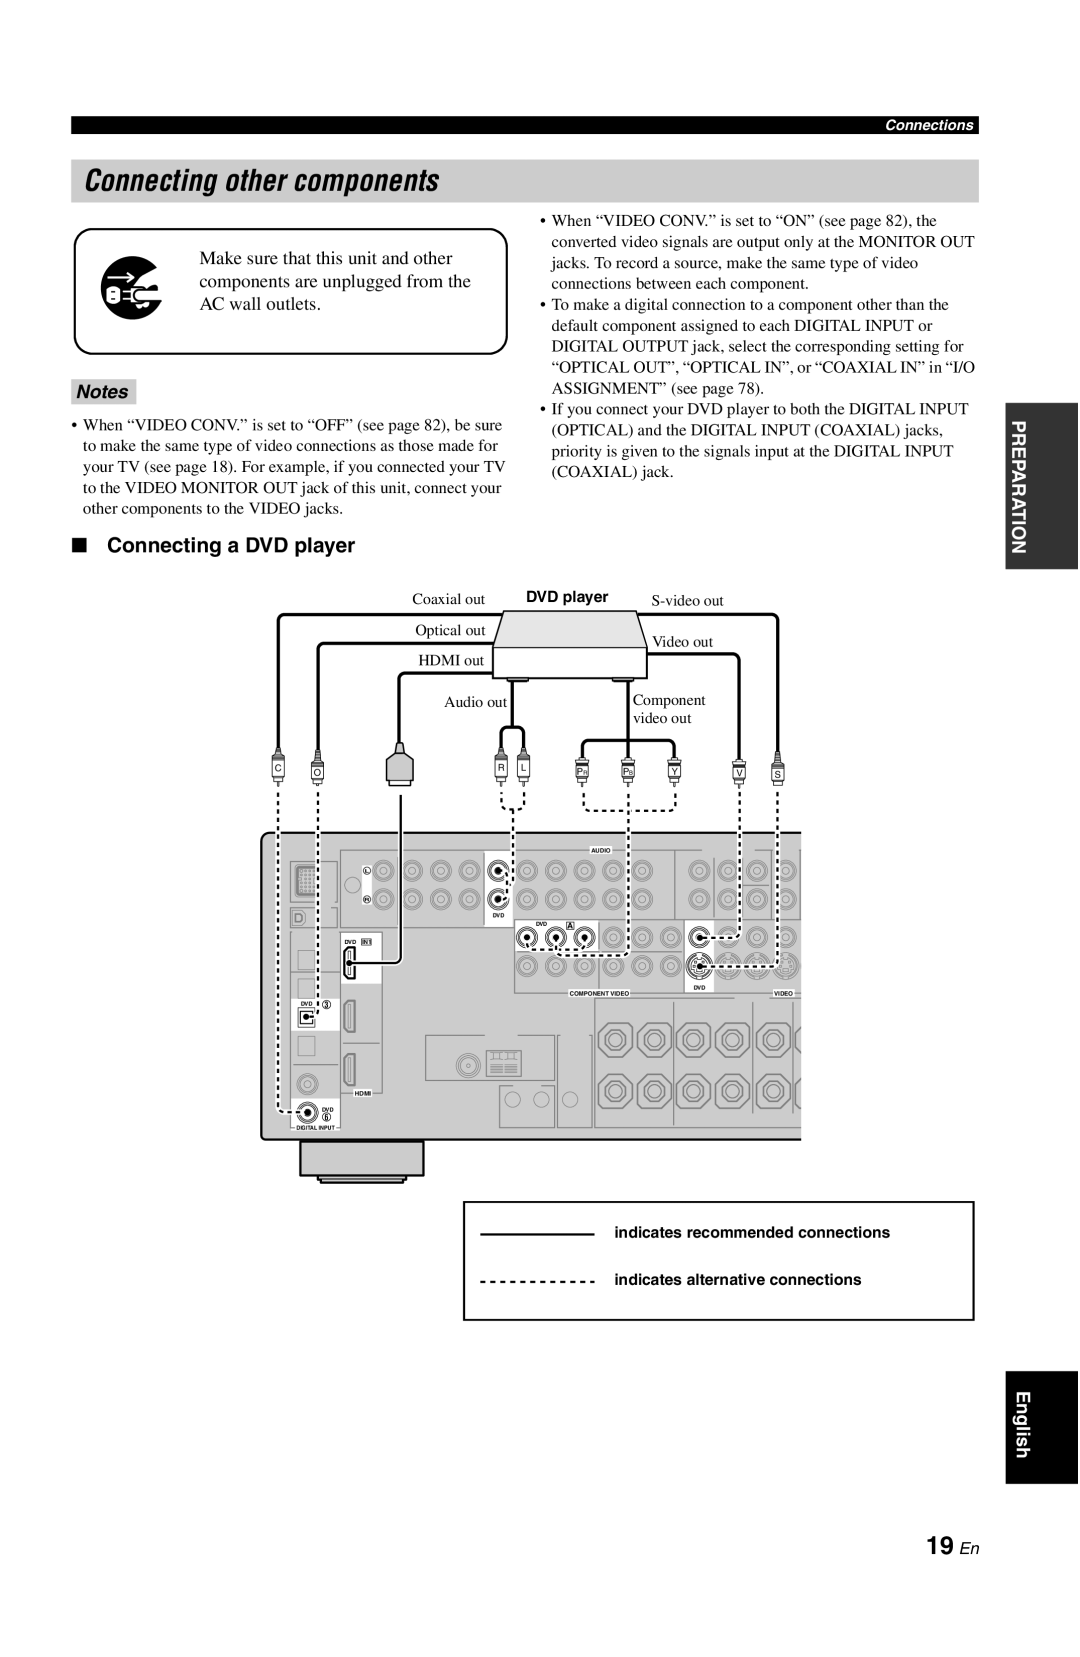 Yamaha RX-V861 owner manual Connecting other components, 19 En, Connecting a DVD player, Notes 